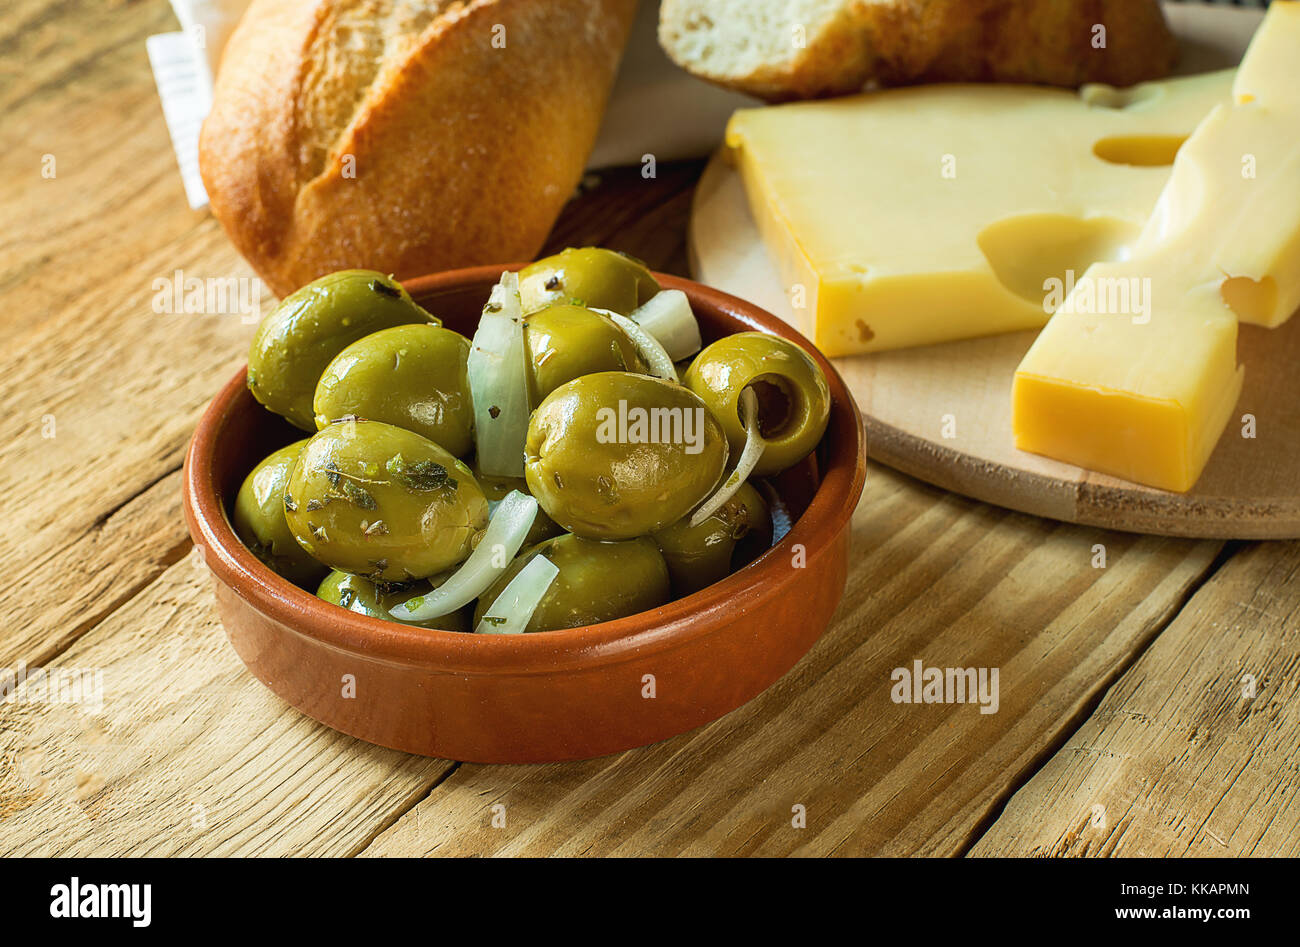 Big Spanish Green Gordal Olives with Herbs and Onions in Earthenware Bowl Sliced Baguette Maasdam Cheese on Cutting Board Wood Table Rustic Interior M Stock Photo